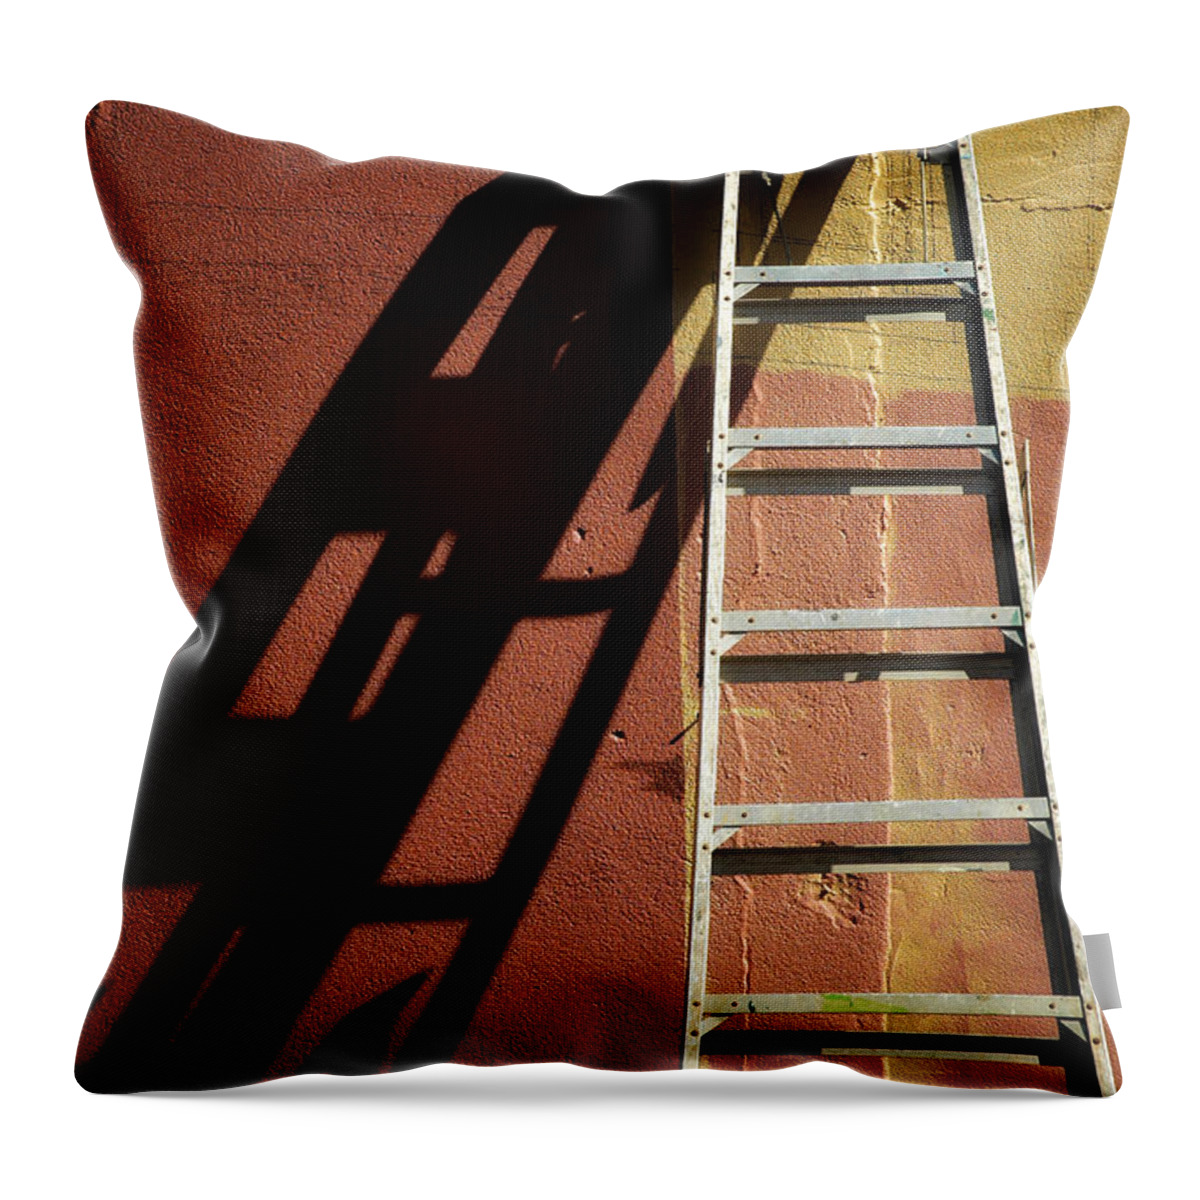 Riverside Gardens Park Throw Pillow featuring the photograph Ladder And Shadow On The Wall by Gary Slawsky